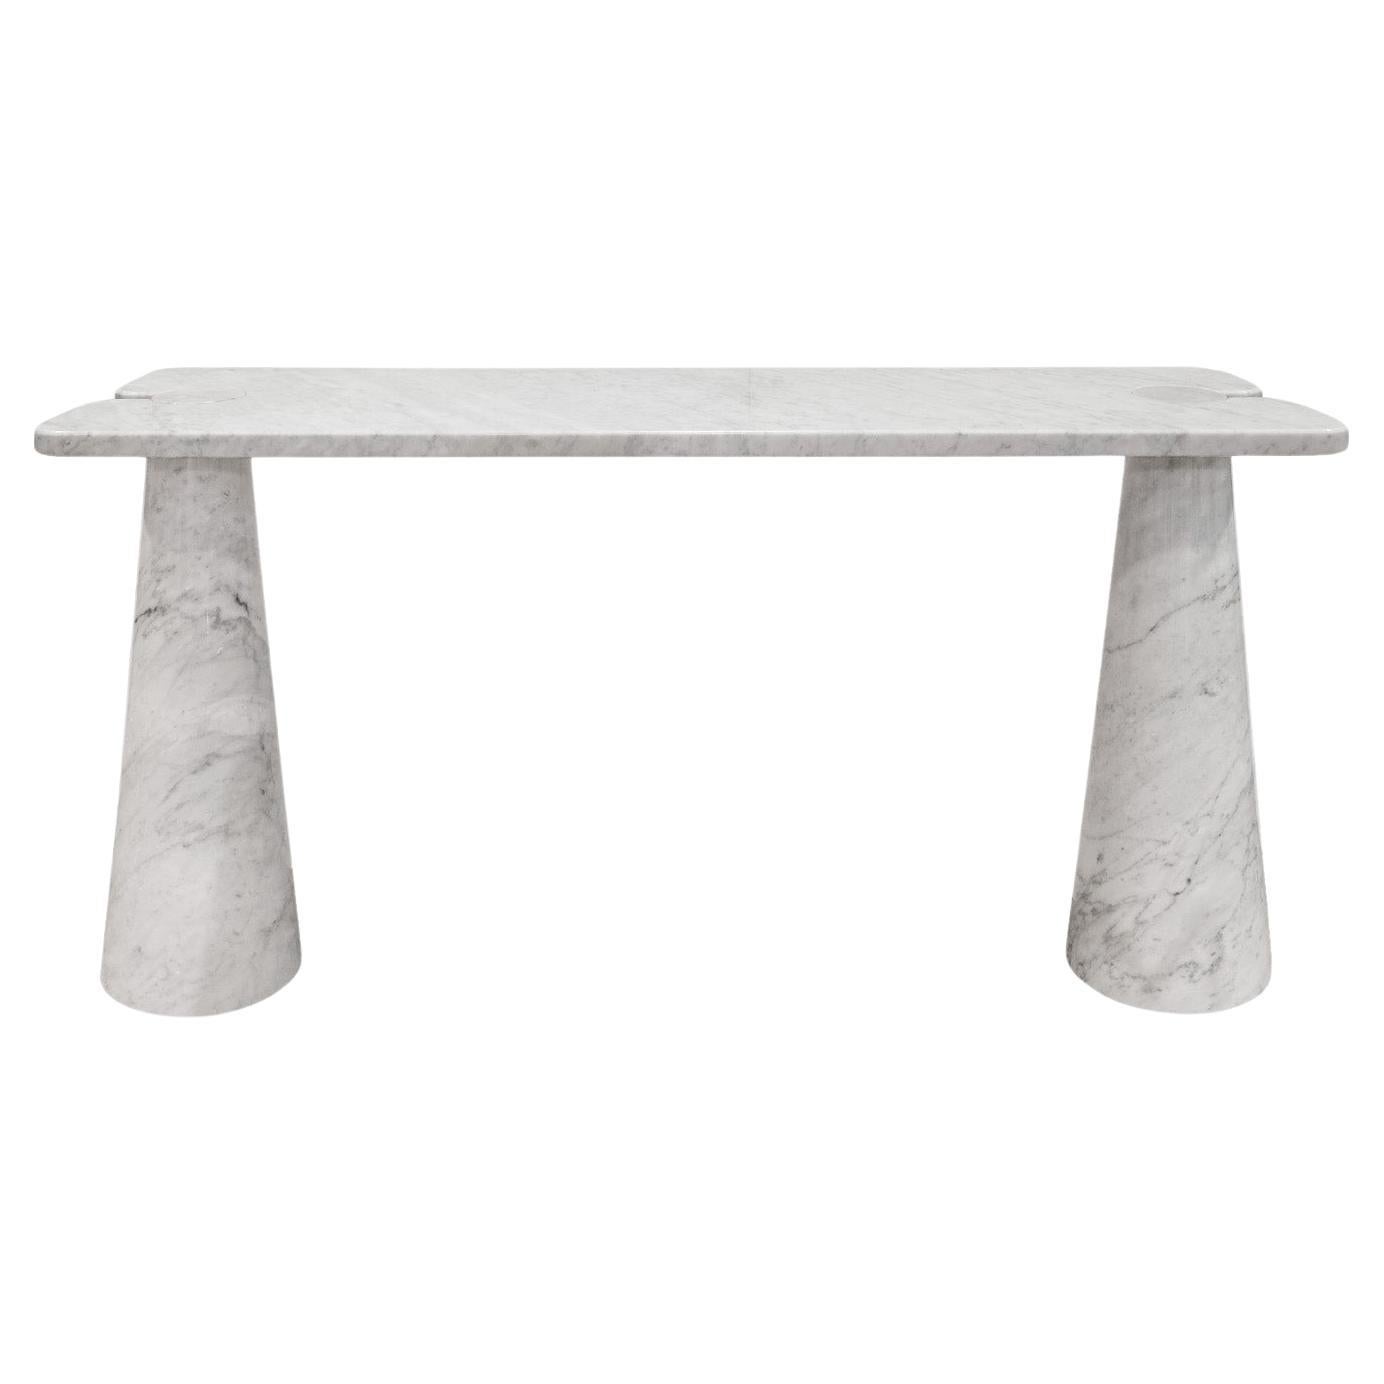 Angelo Mangiarotti Eros Collection Console Table in Polished White Marble 1970s